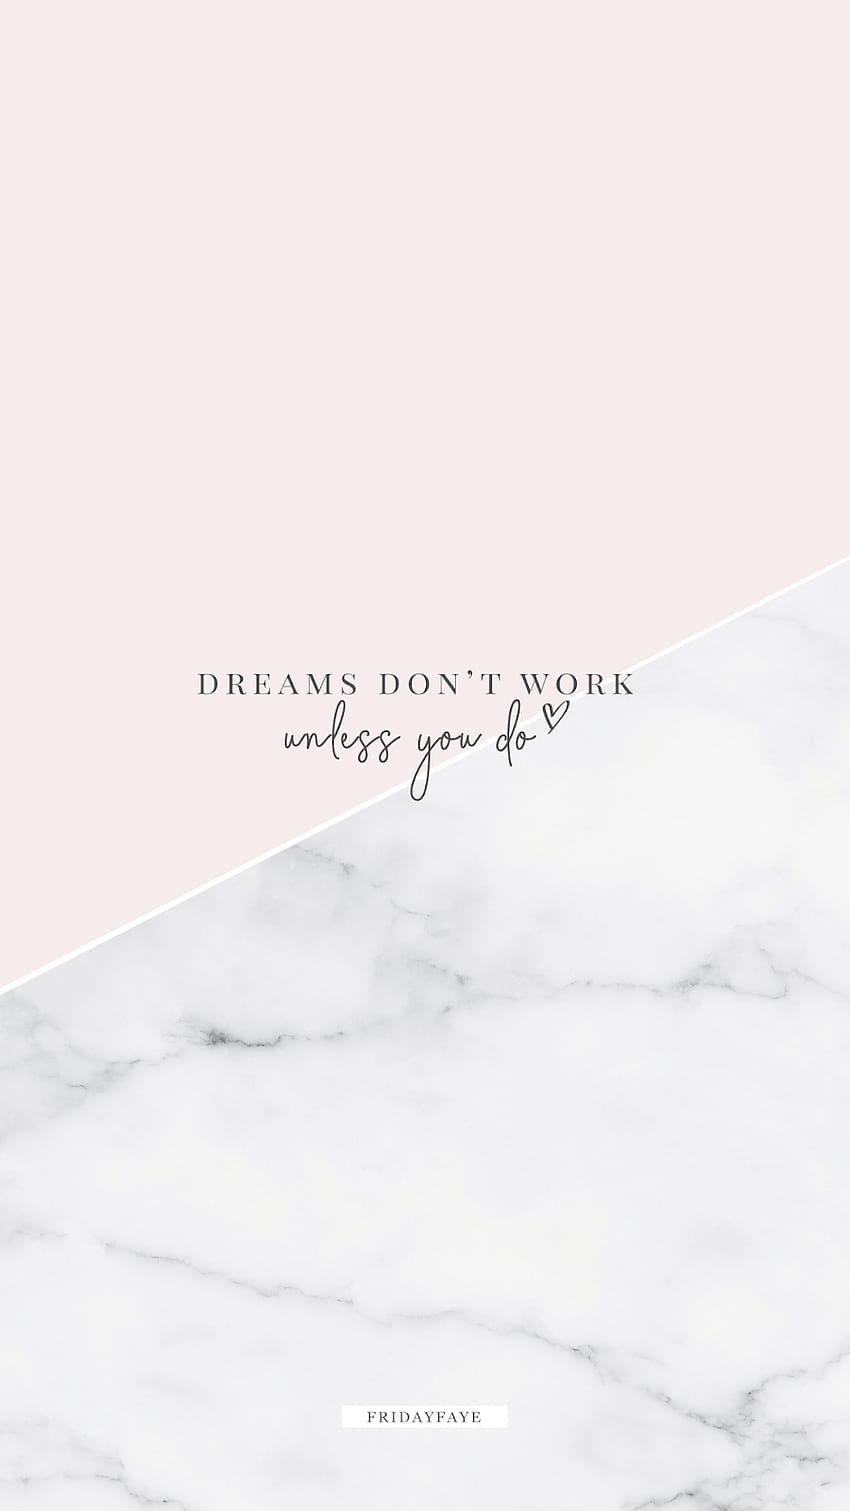 Dreams Don't Work Unless You Do in 2020, new year motivation HD phone wallpaper